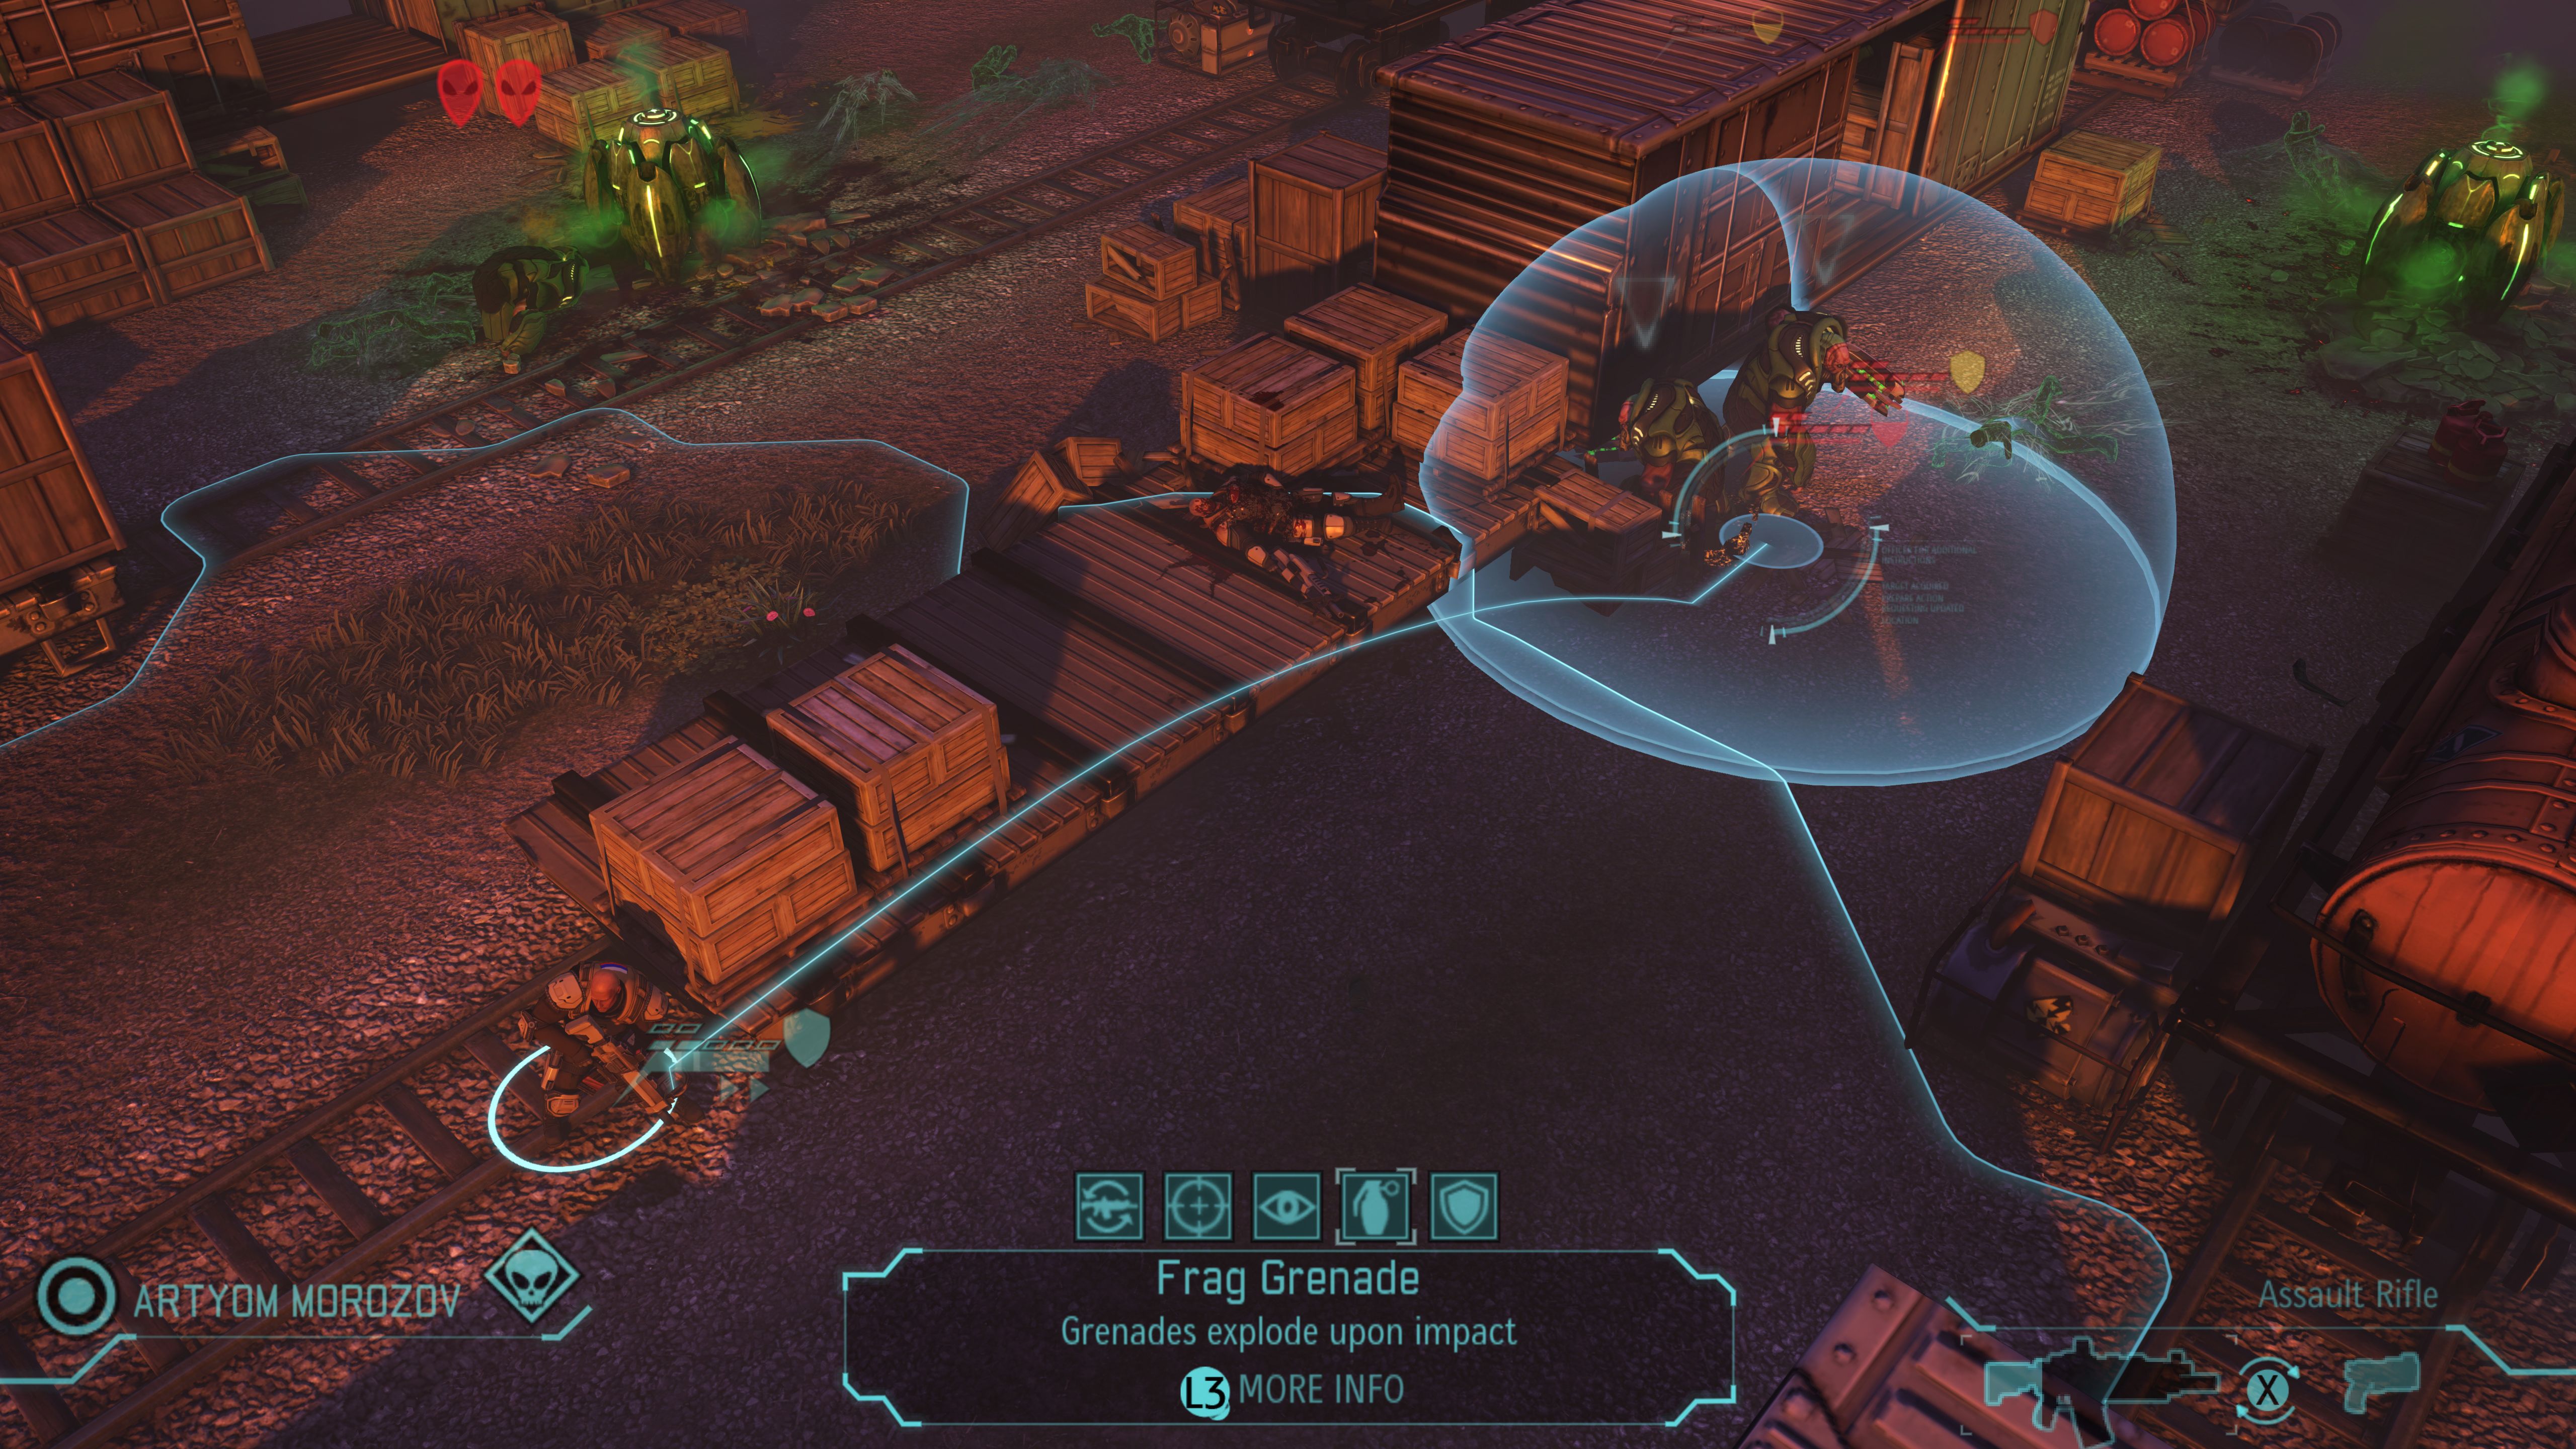 XCOM 2, one of the best PC strategy games ever, is this week's